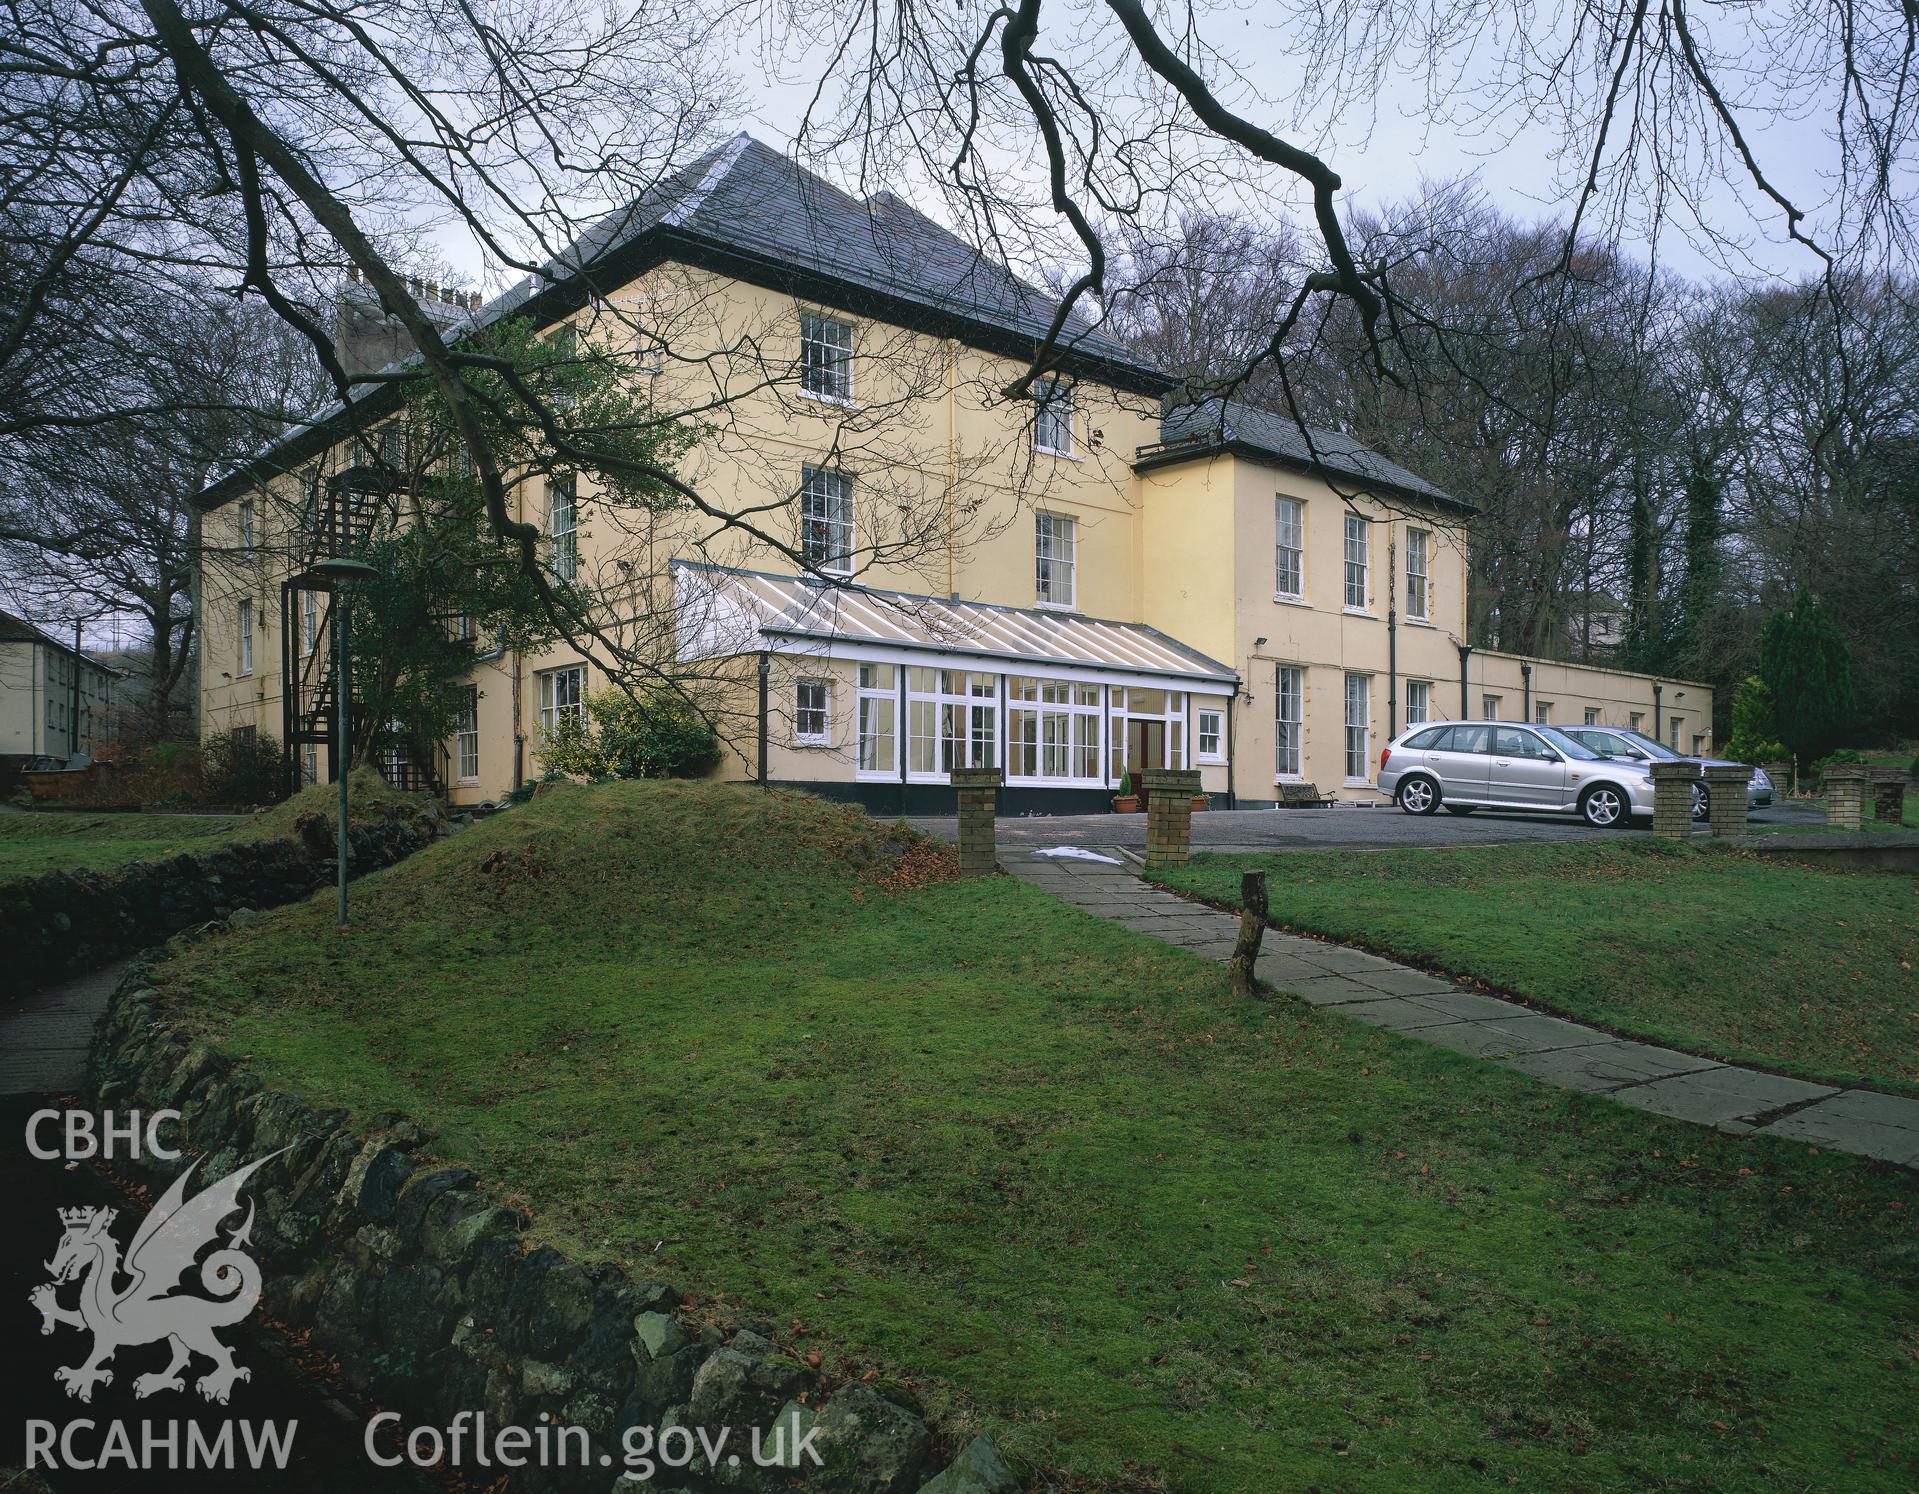 RCAHMW colour transparency showing exterior view of Ty Mawr, Blaenavon